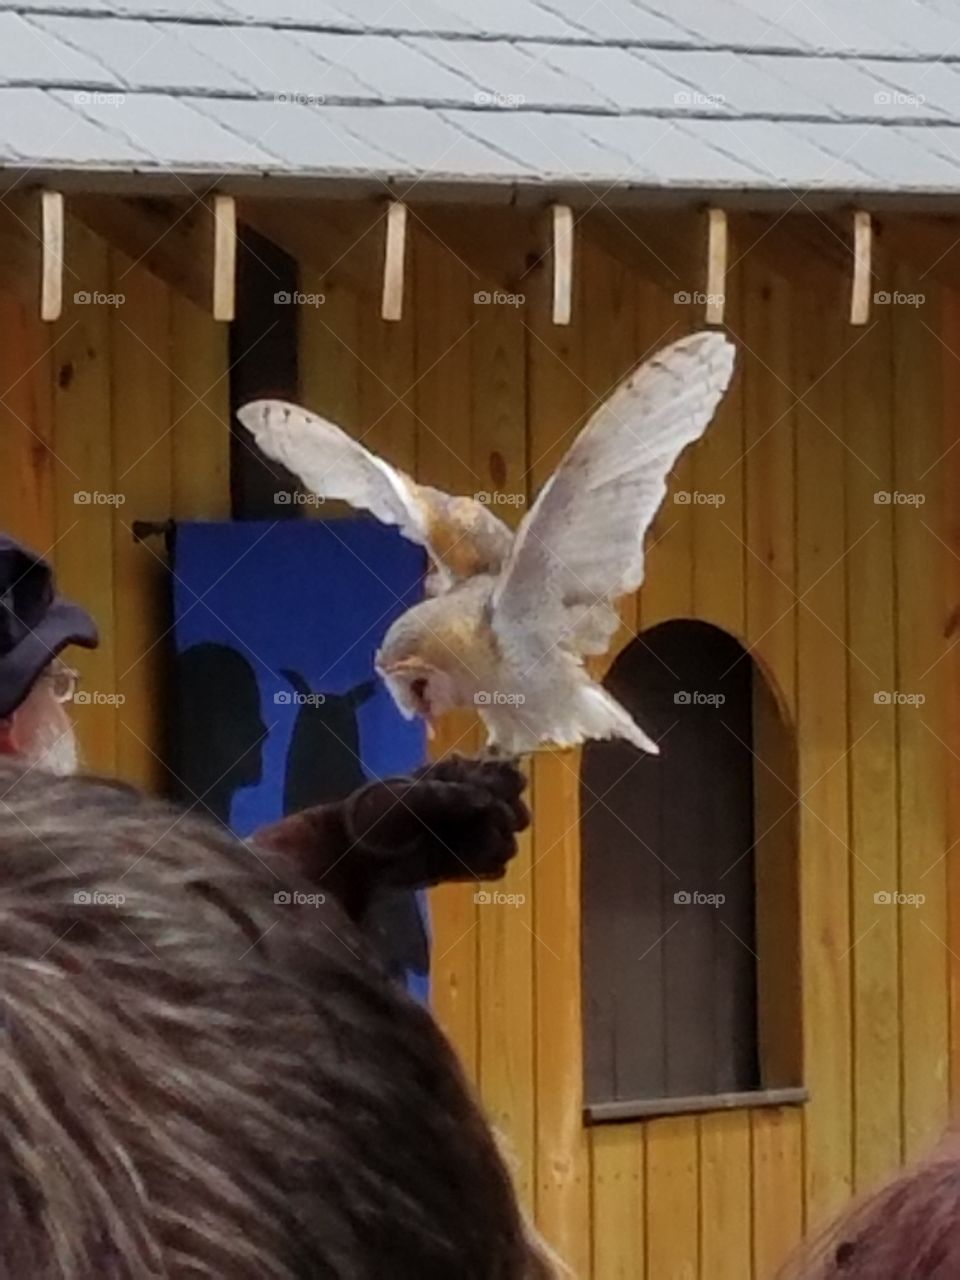 Sherwood Forest Faire pic set